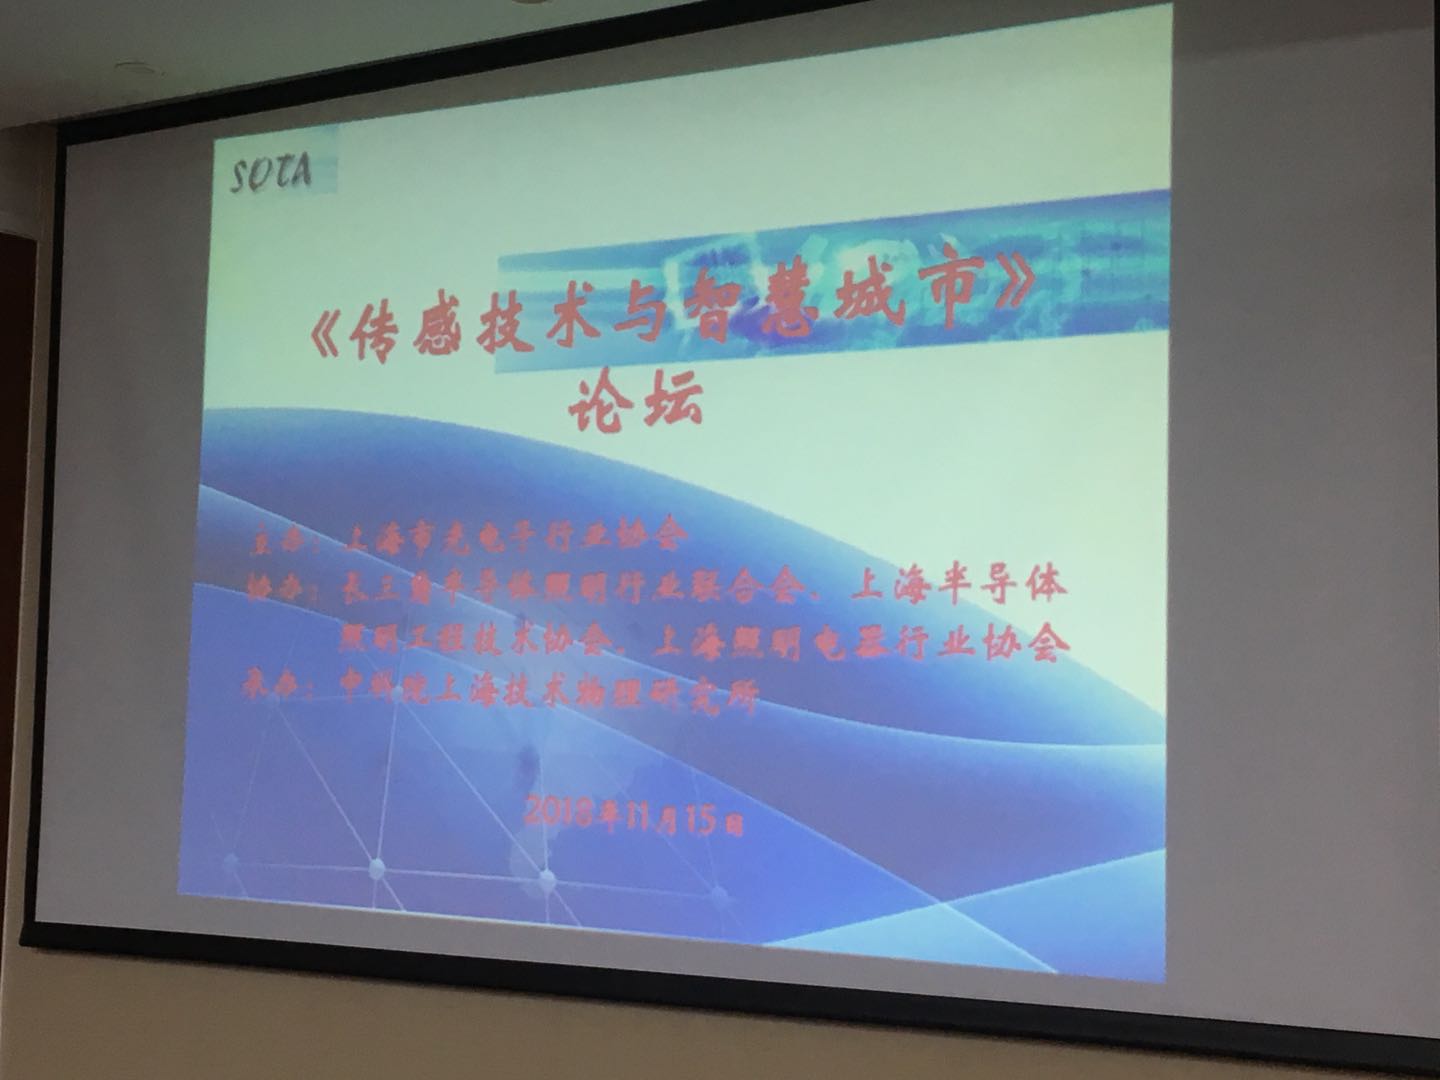 The LED Bulb Expert WELLMAX Invited to the Sensor Technology and Smart City Seminar in Shanghai